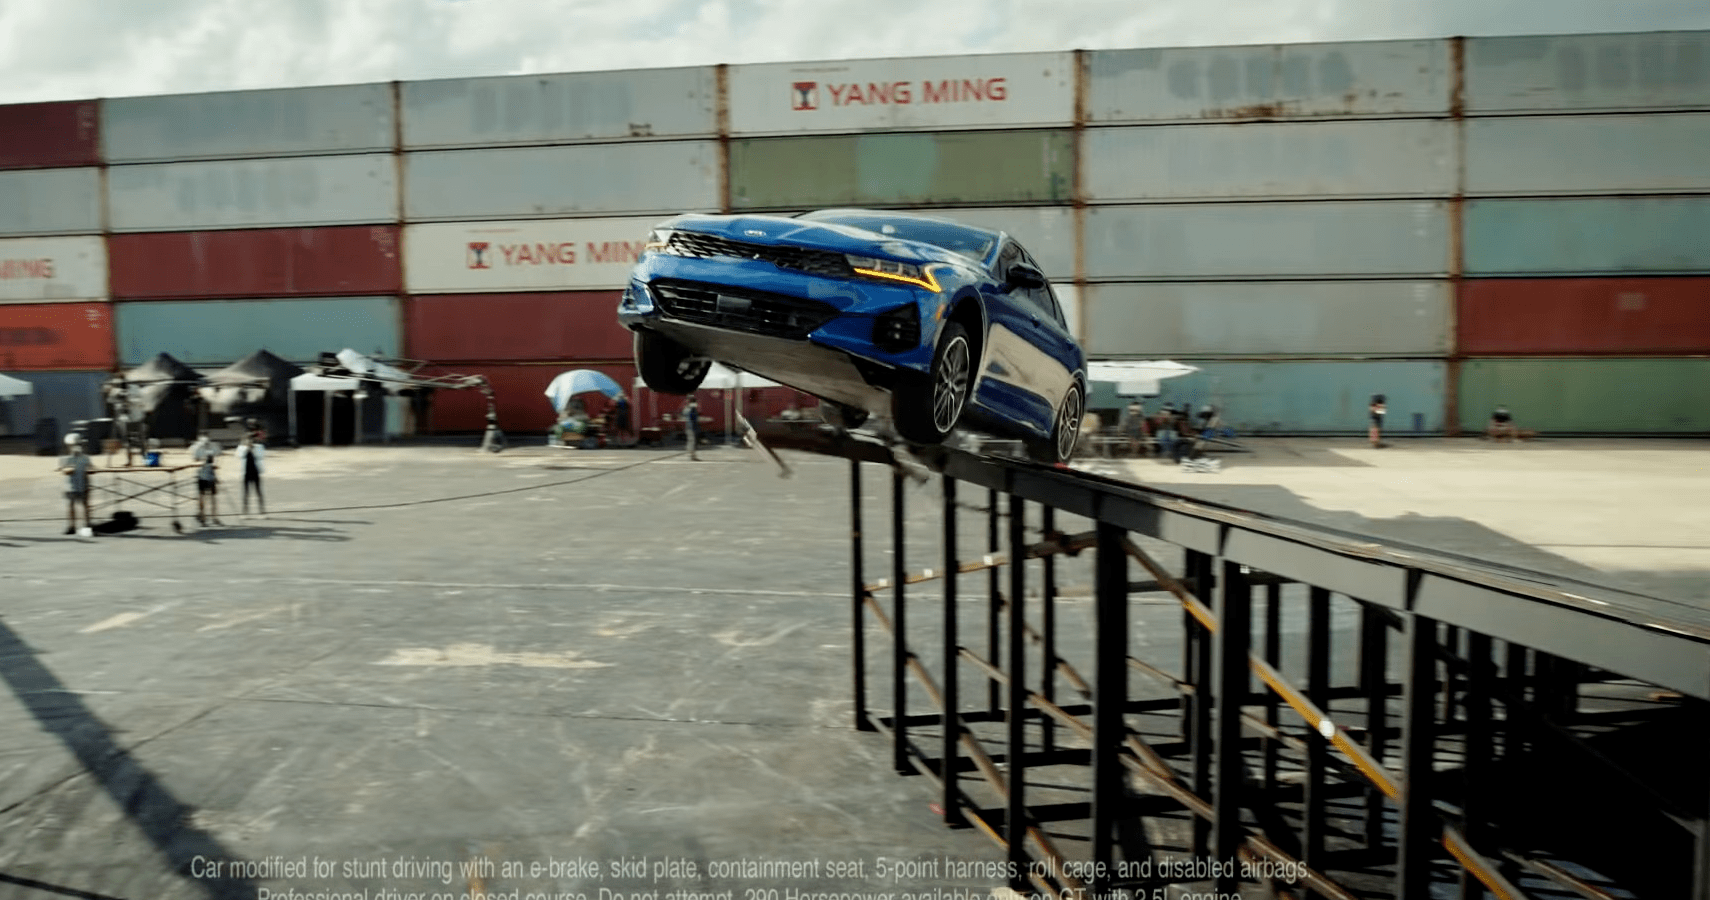 Watch Kia Complete An Impossible Stunt In The New K5 GT!